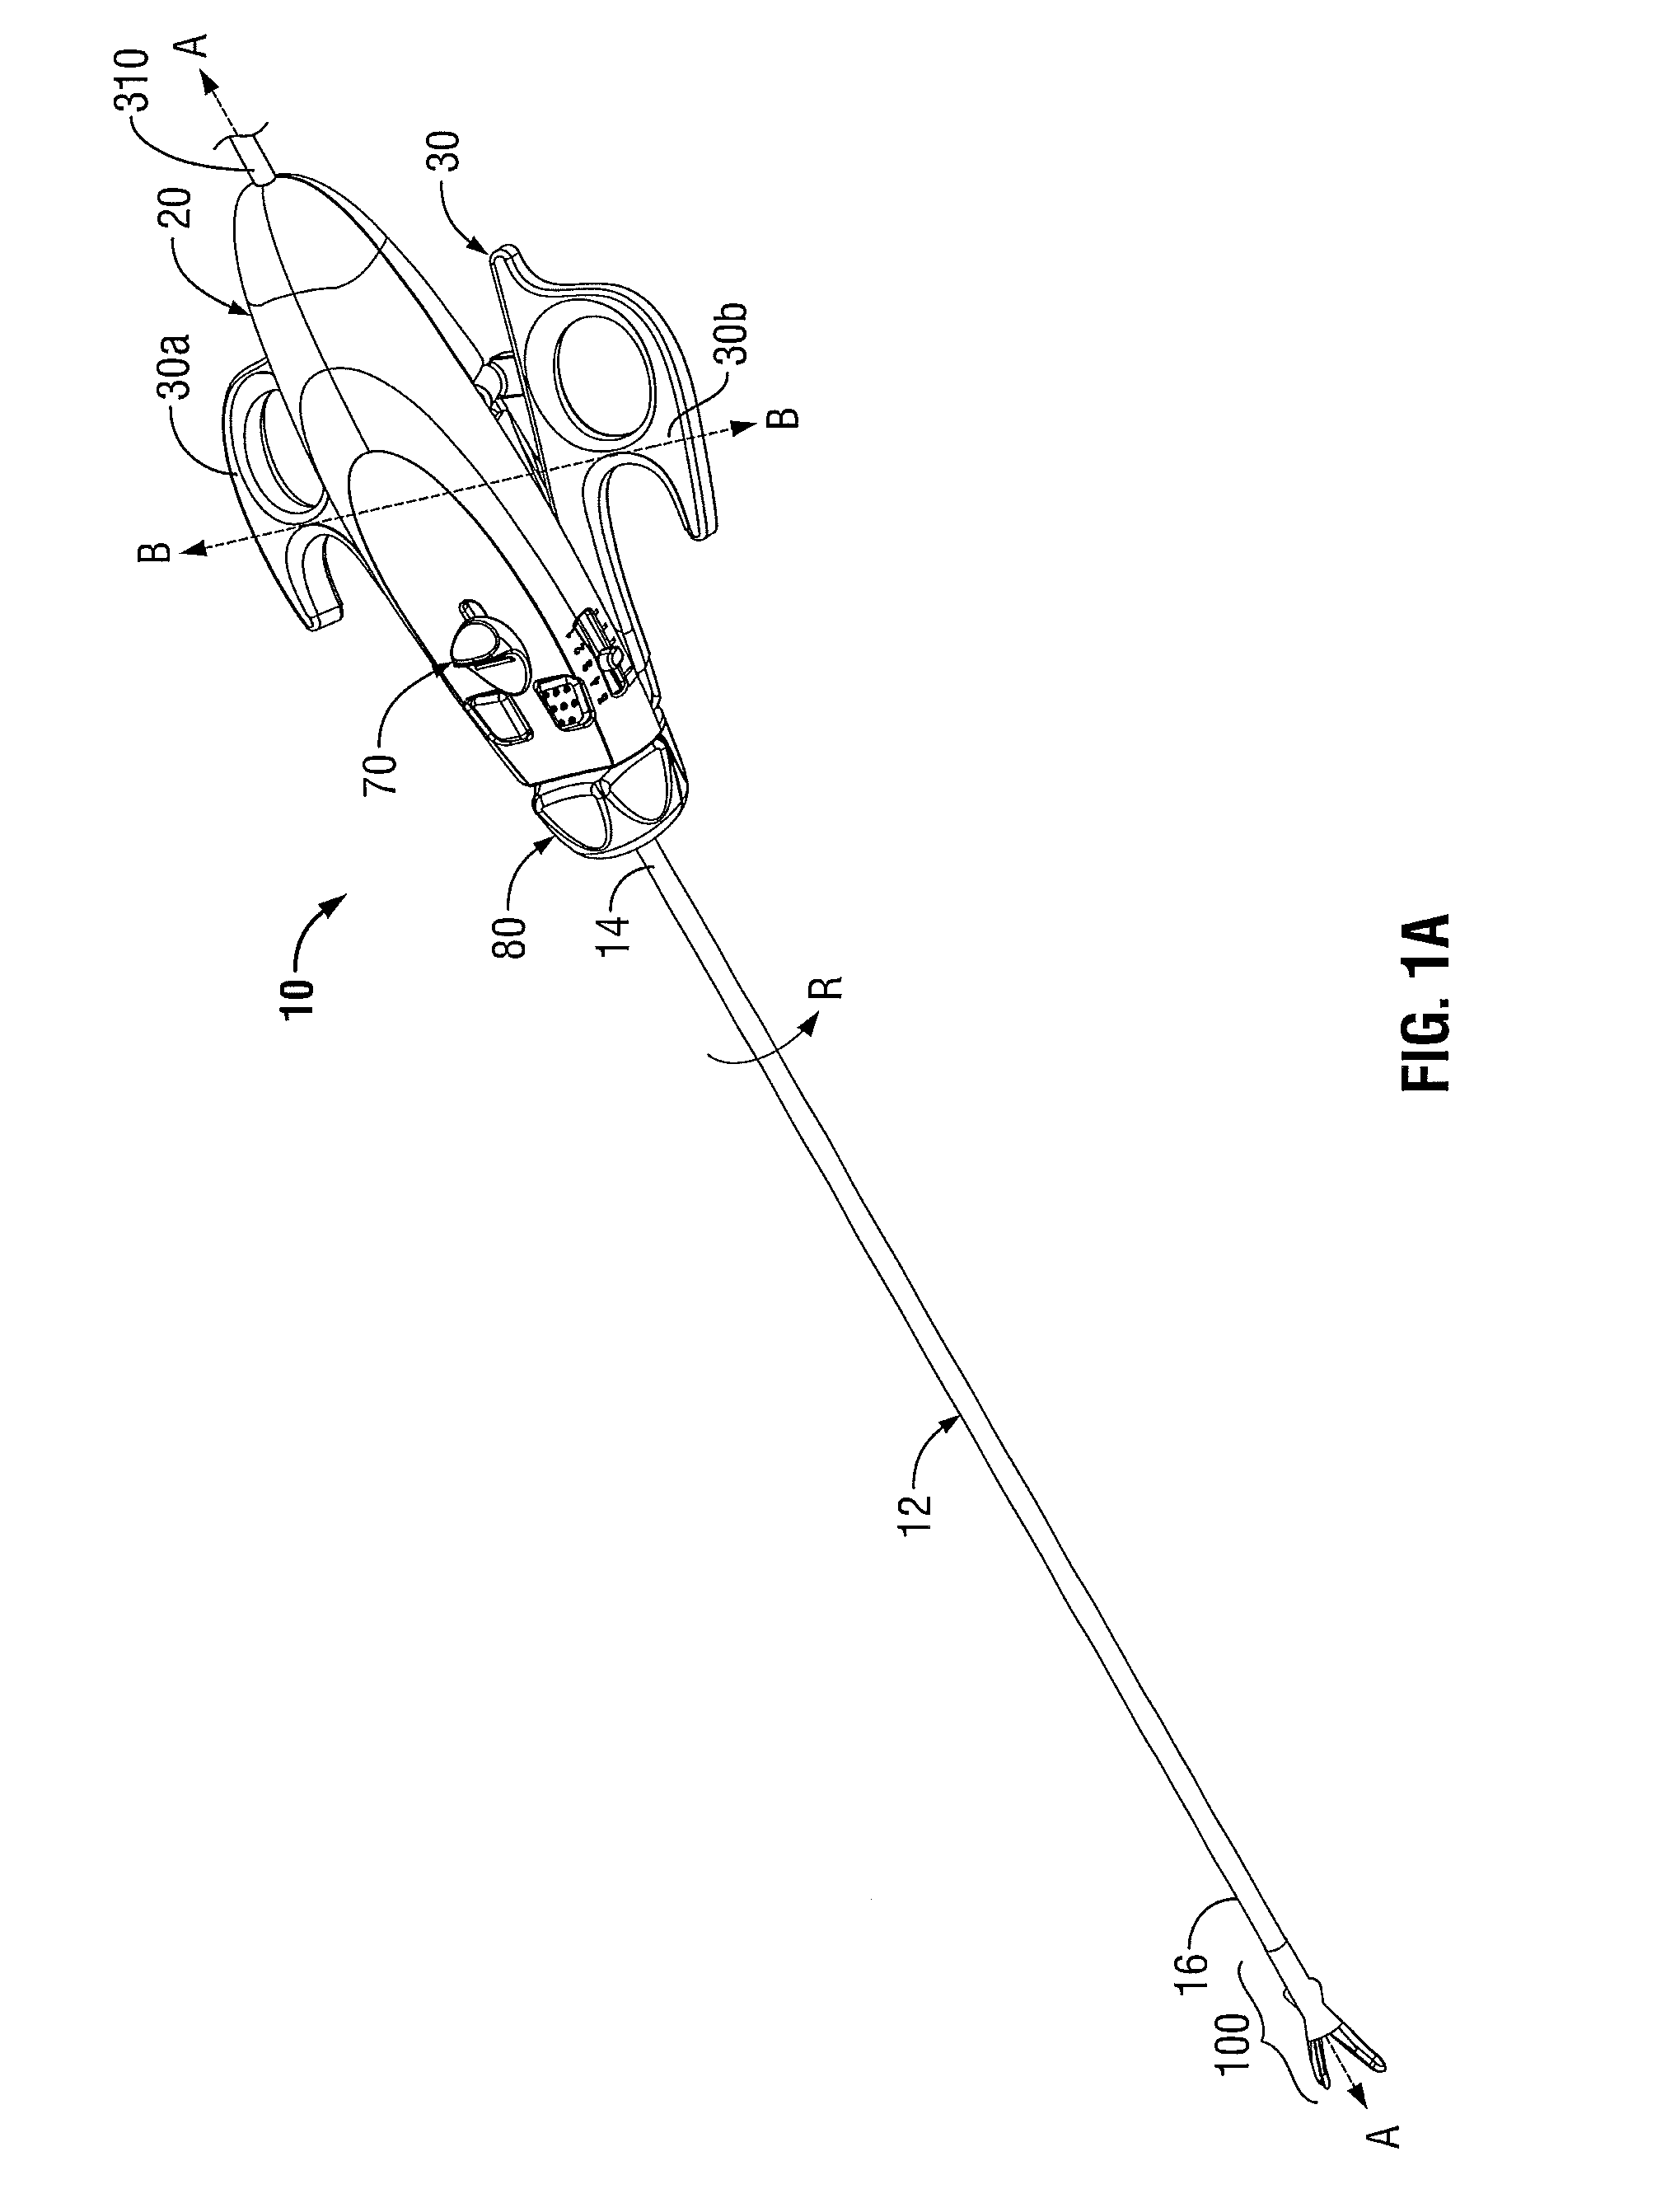 Endoscopic electrosurgical jaws with offset knife